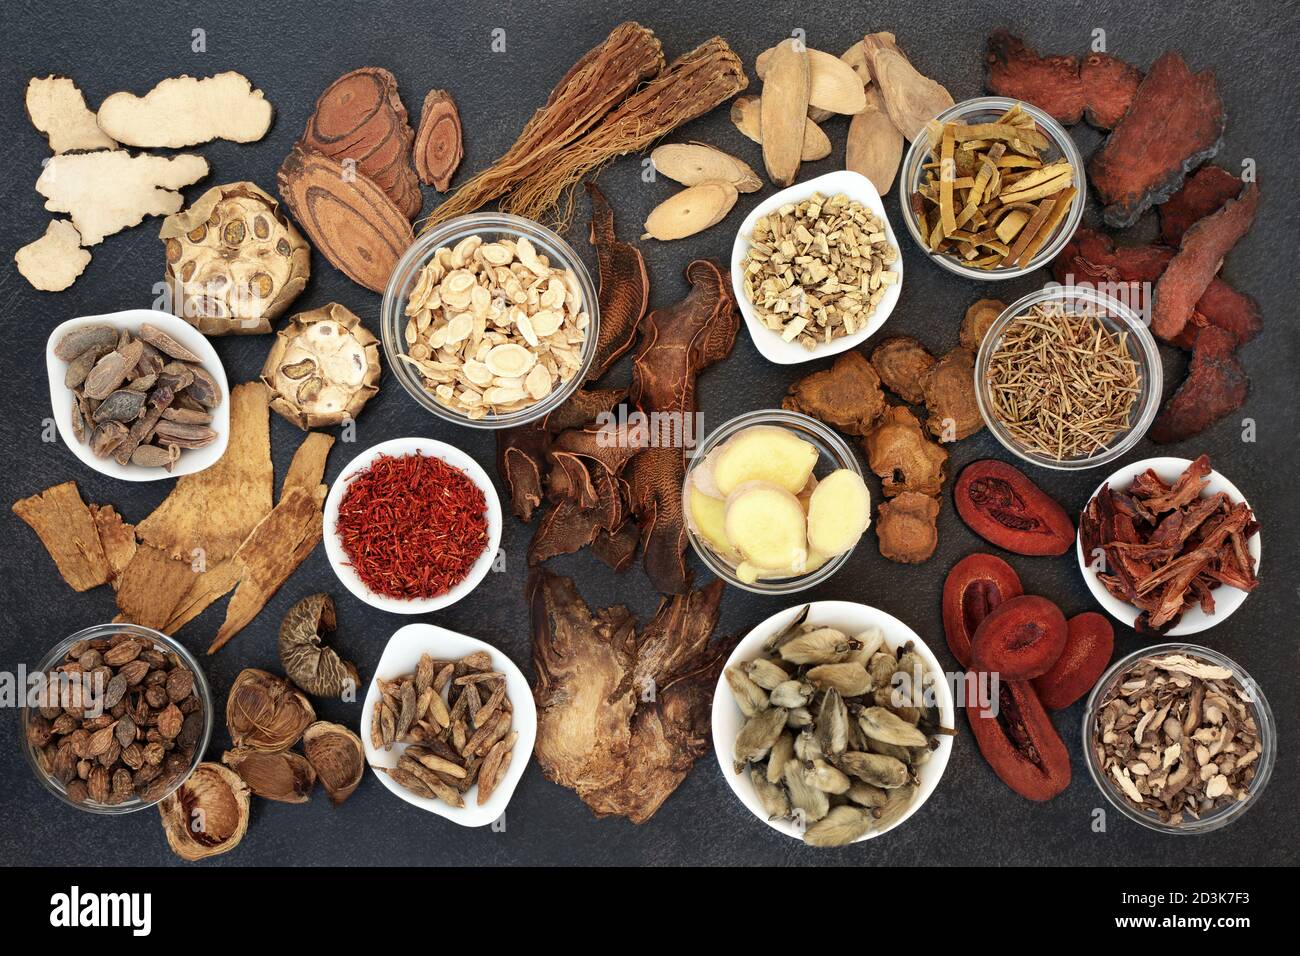 Large Chinese herb collection used in traditional & holistic herbal medicine. Natural health care concept. Flat lay, top view. Stock Photo